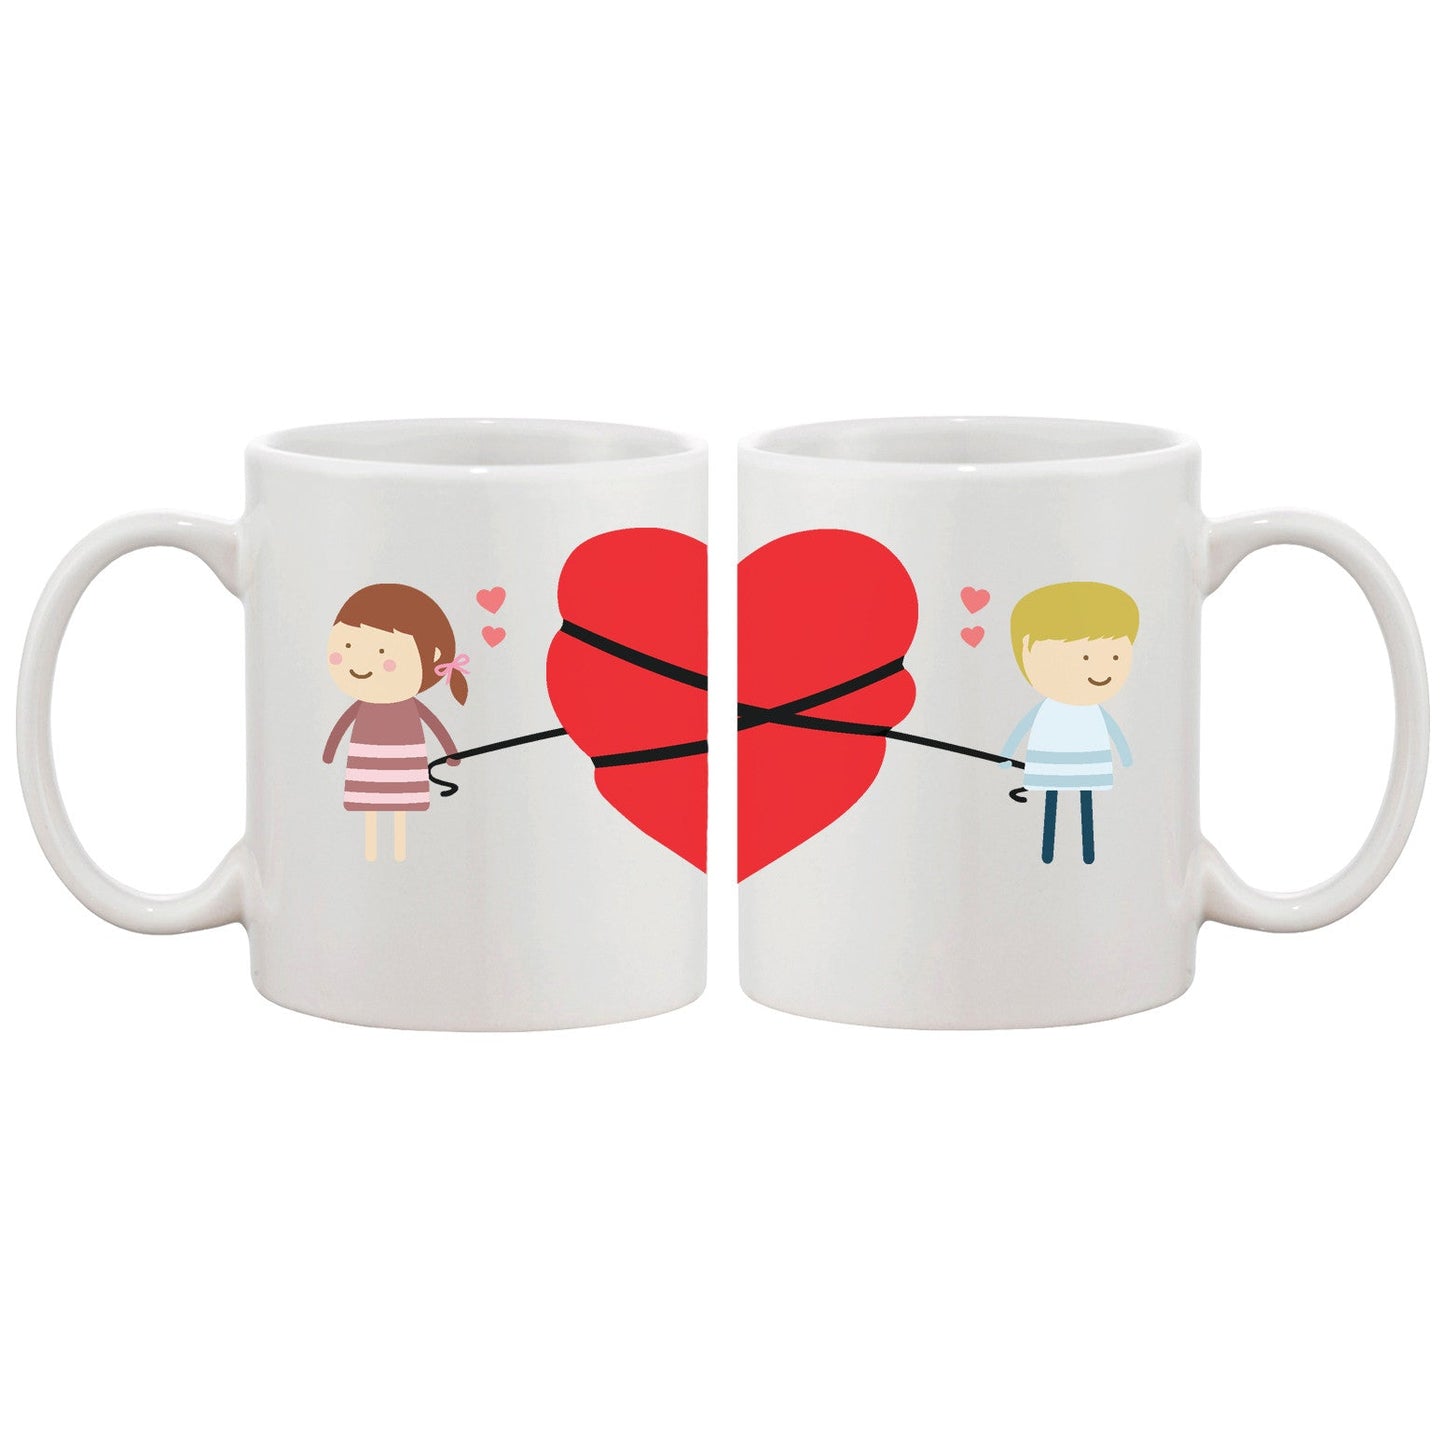 Love Connecting Couple Mugs Cute Graphic Design Coffee Mug Cup 11 oz White